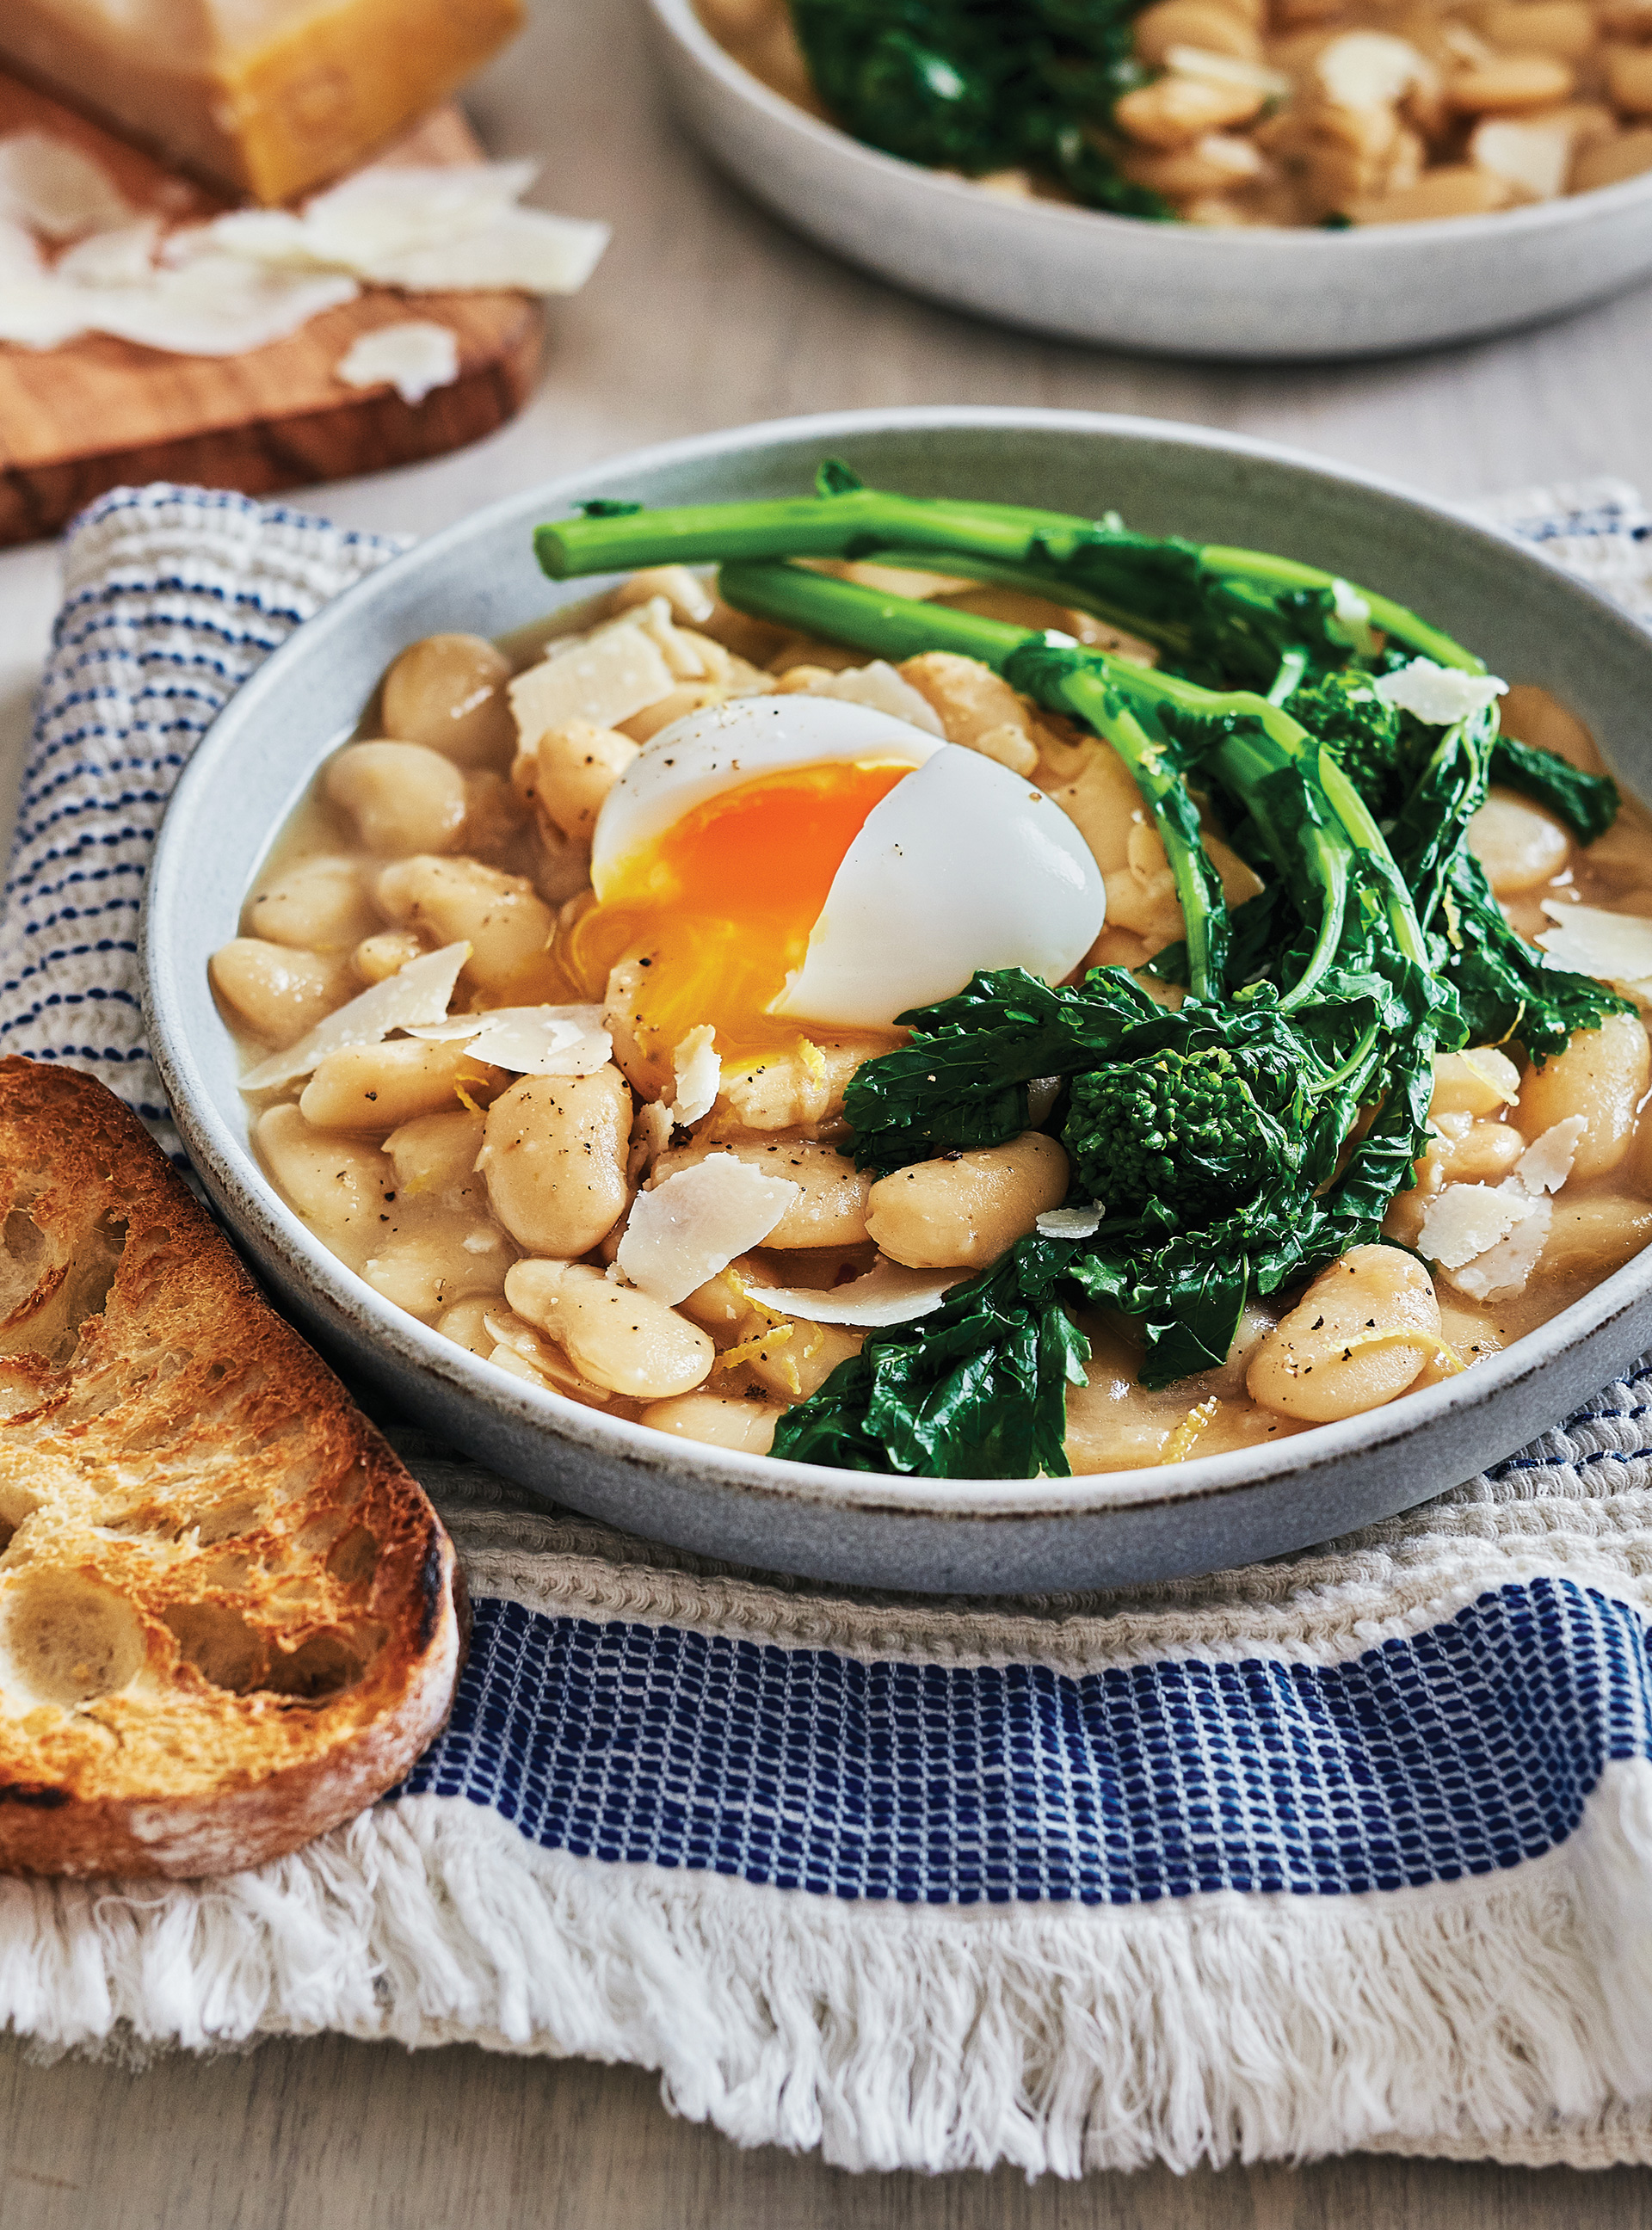 Oven-Baked White Beans in Broth with Soft-Boiled Eggs